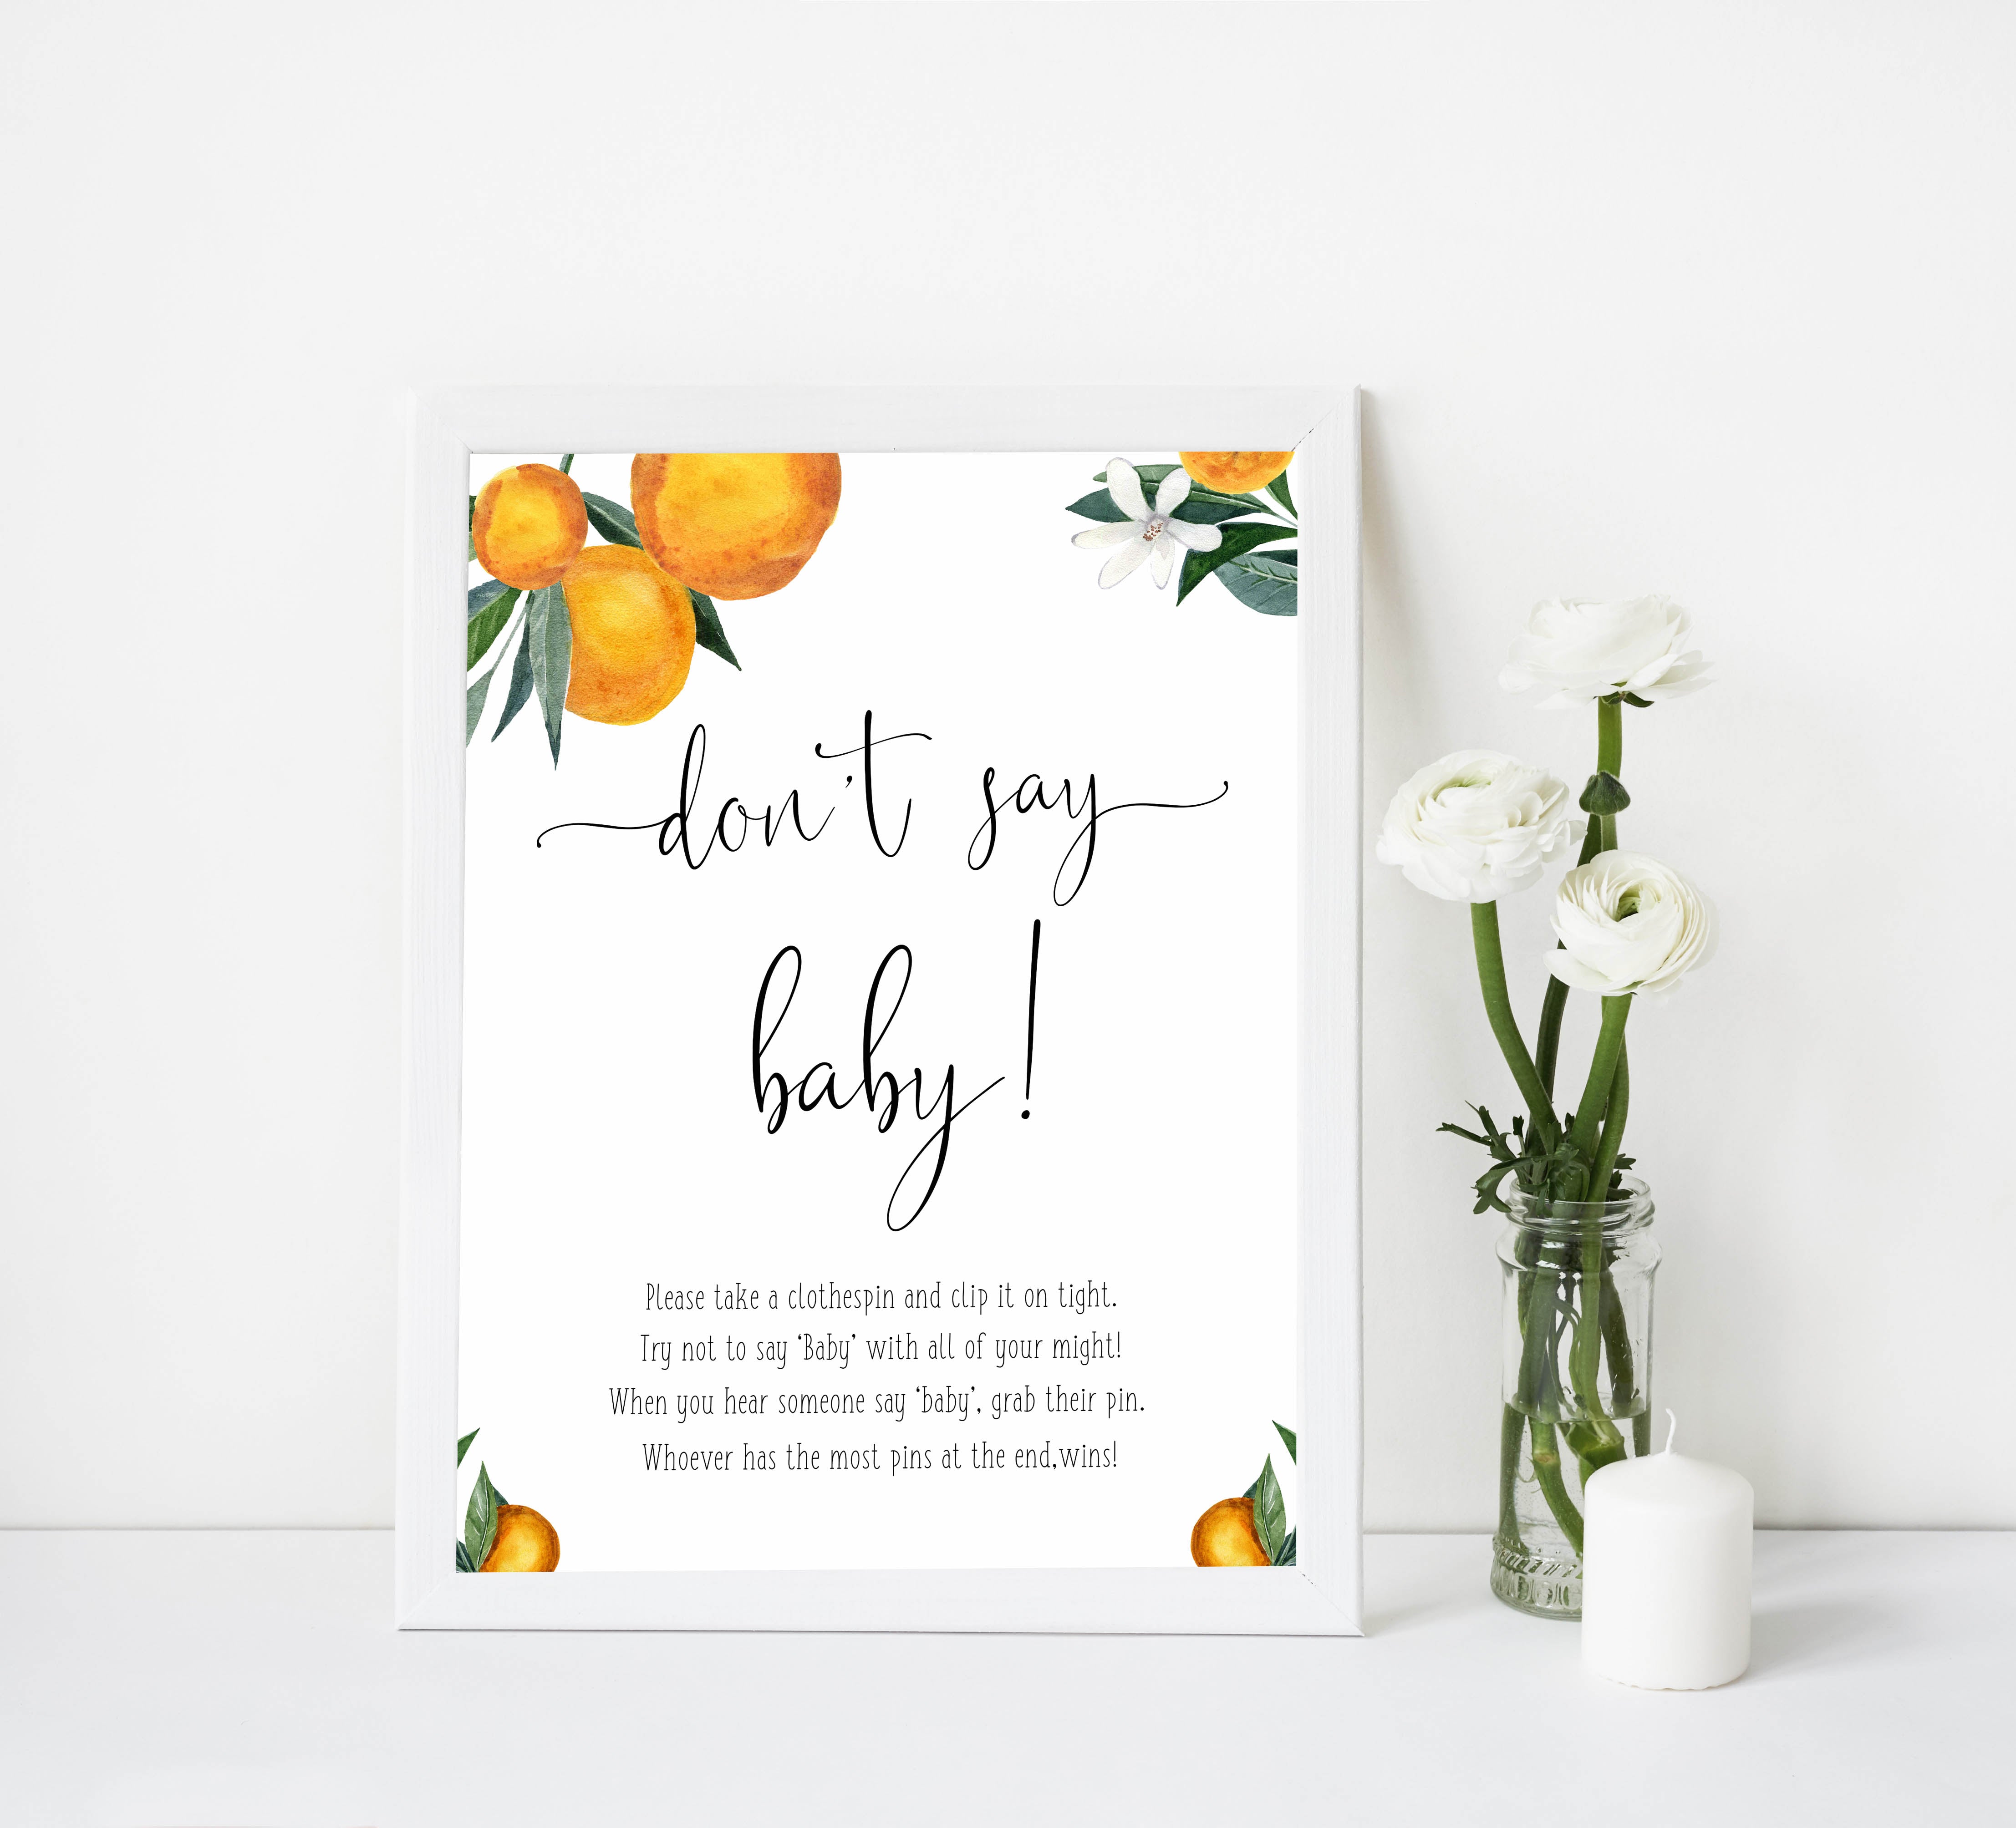 don't say baby baby shower game, Printable baby shower games, little cutie baby games, baby shower games, fun baby shower ideas, top baby shower ideas, little cutie baby shower, baby shower games, fun little cutie baby shower ideas, citrus baby shower games, citrus baby shower, orange baby shower